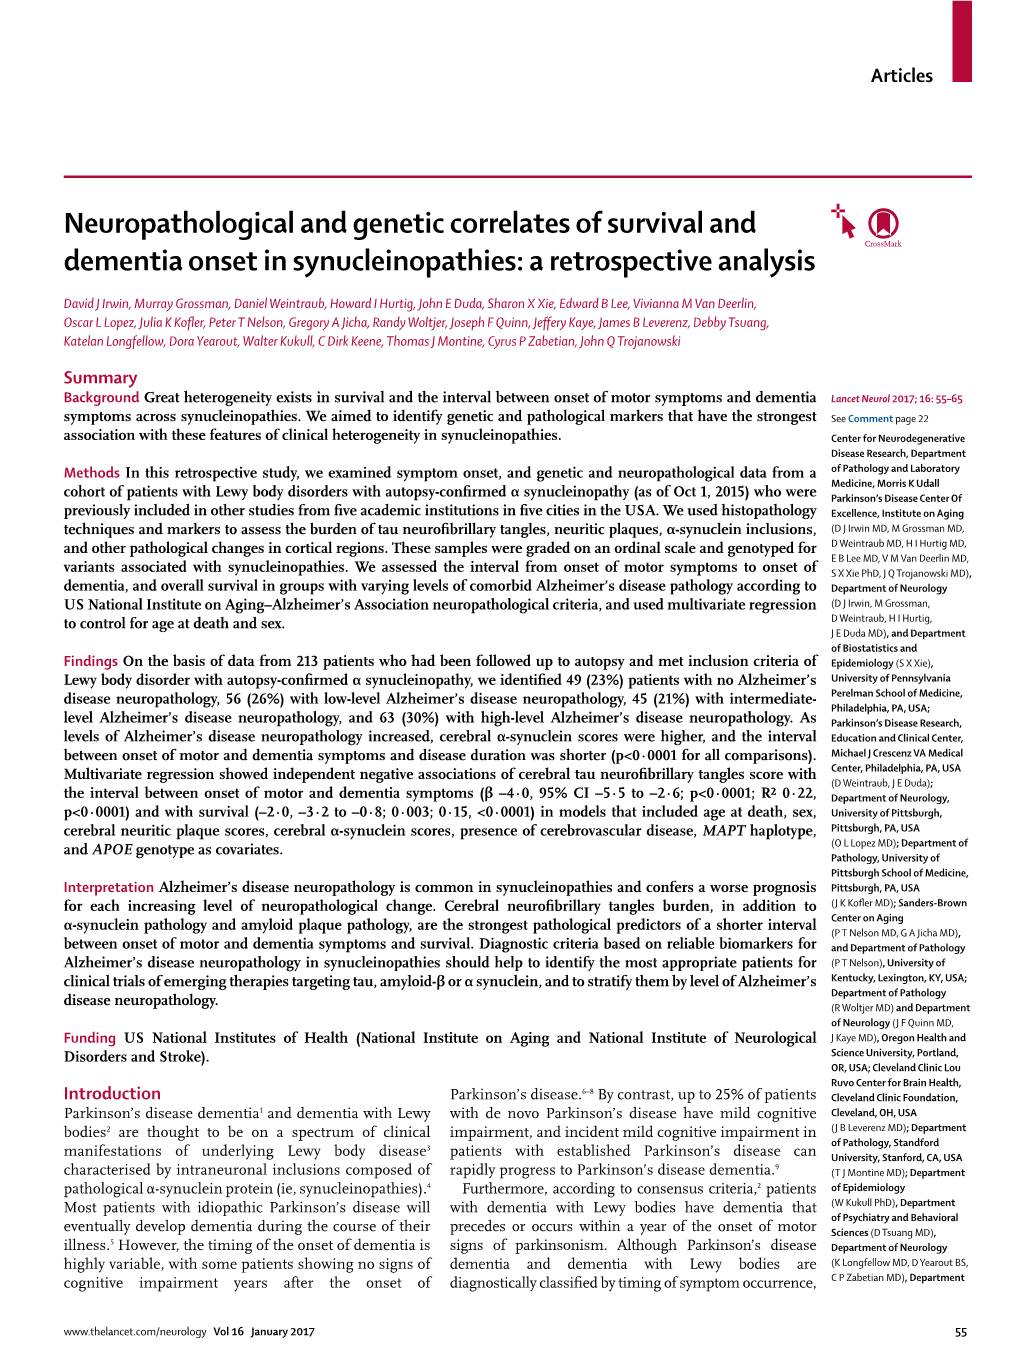 Neuropathological and Genetic Correlates of Survival and Dementia Onset in Synucleinopathies: a Retrospective Analysis